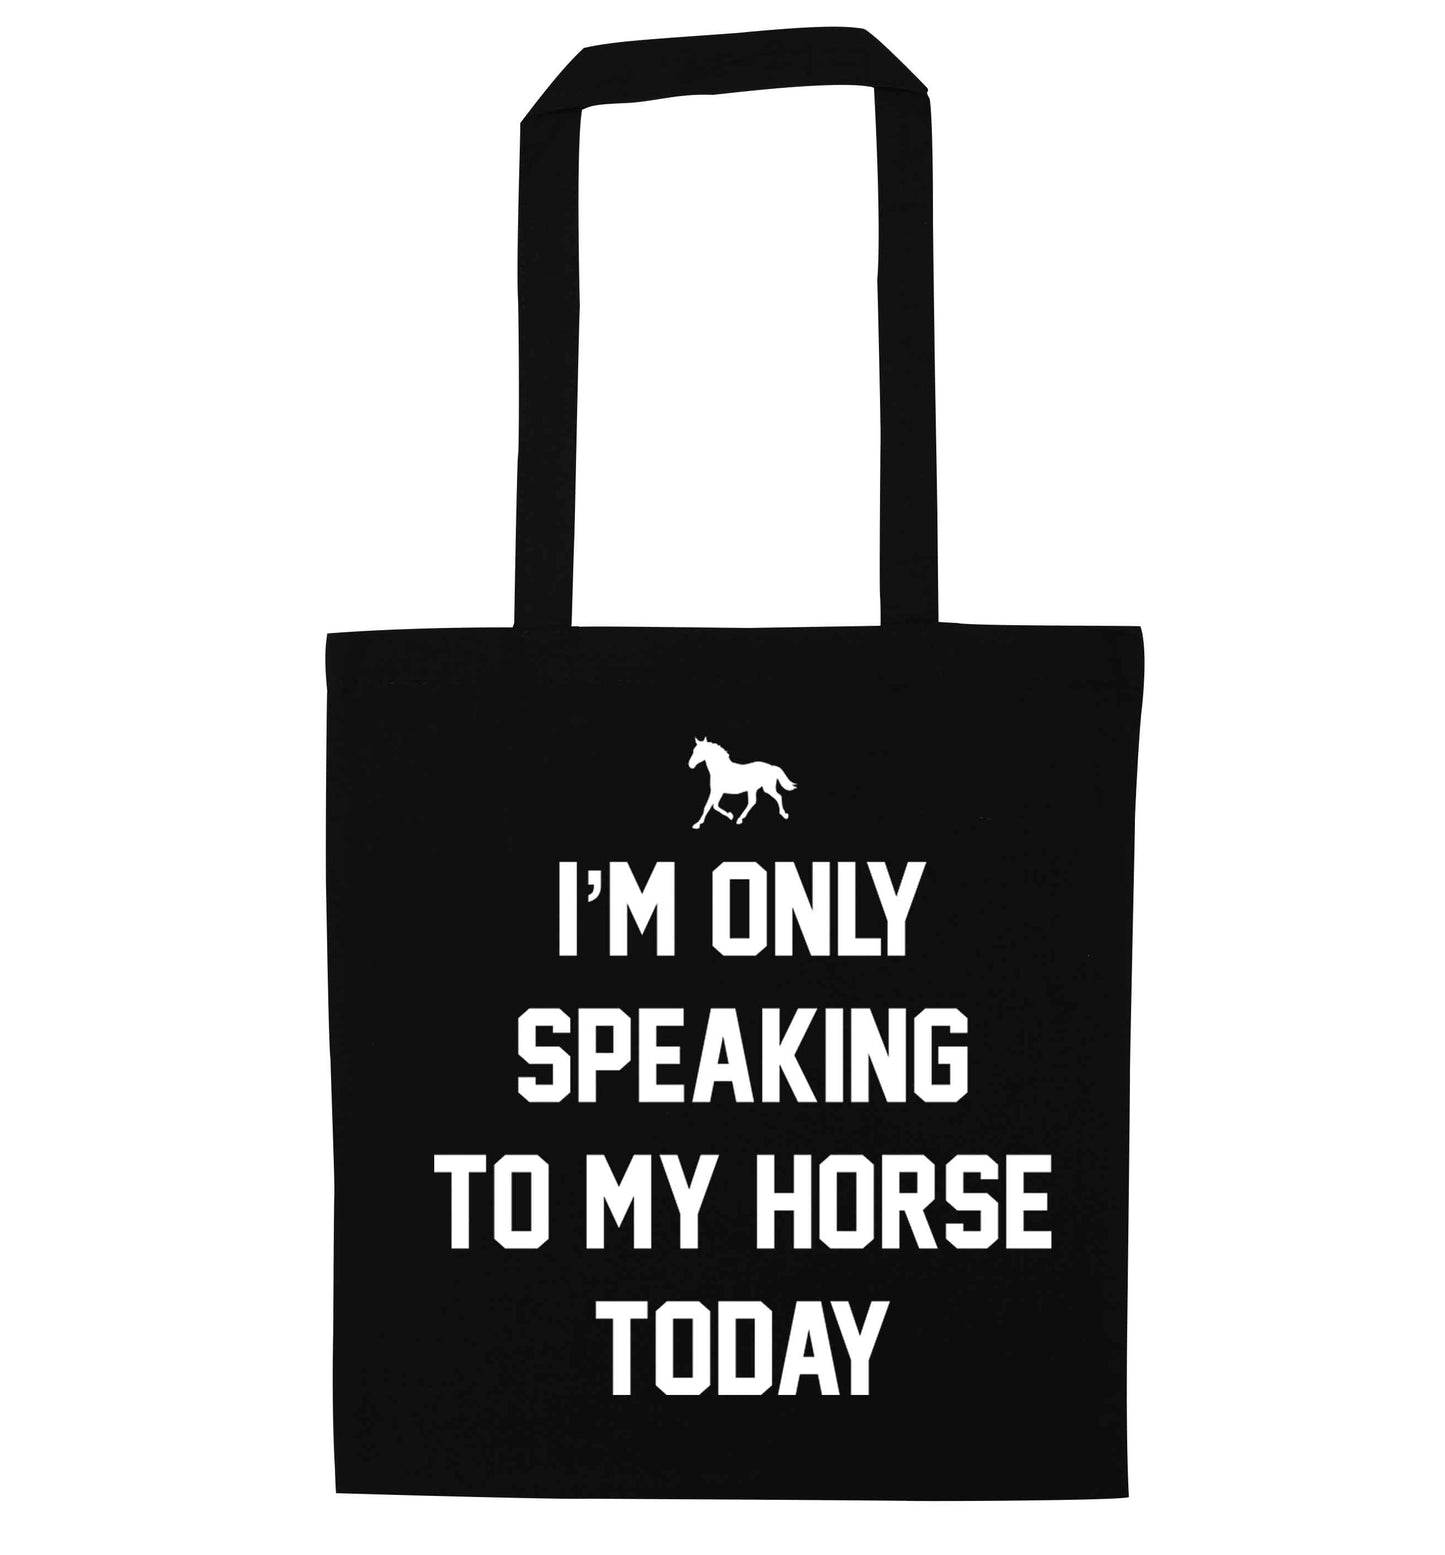 I'm only speaking to my horse today black tote bag